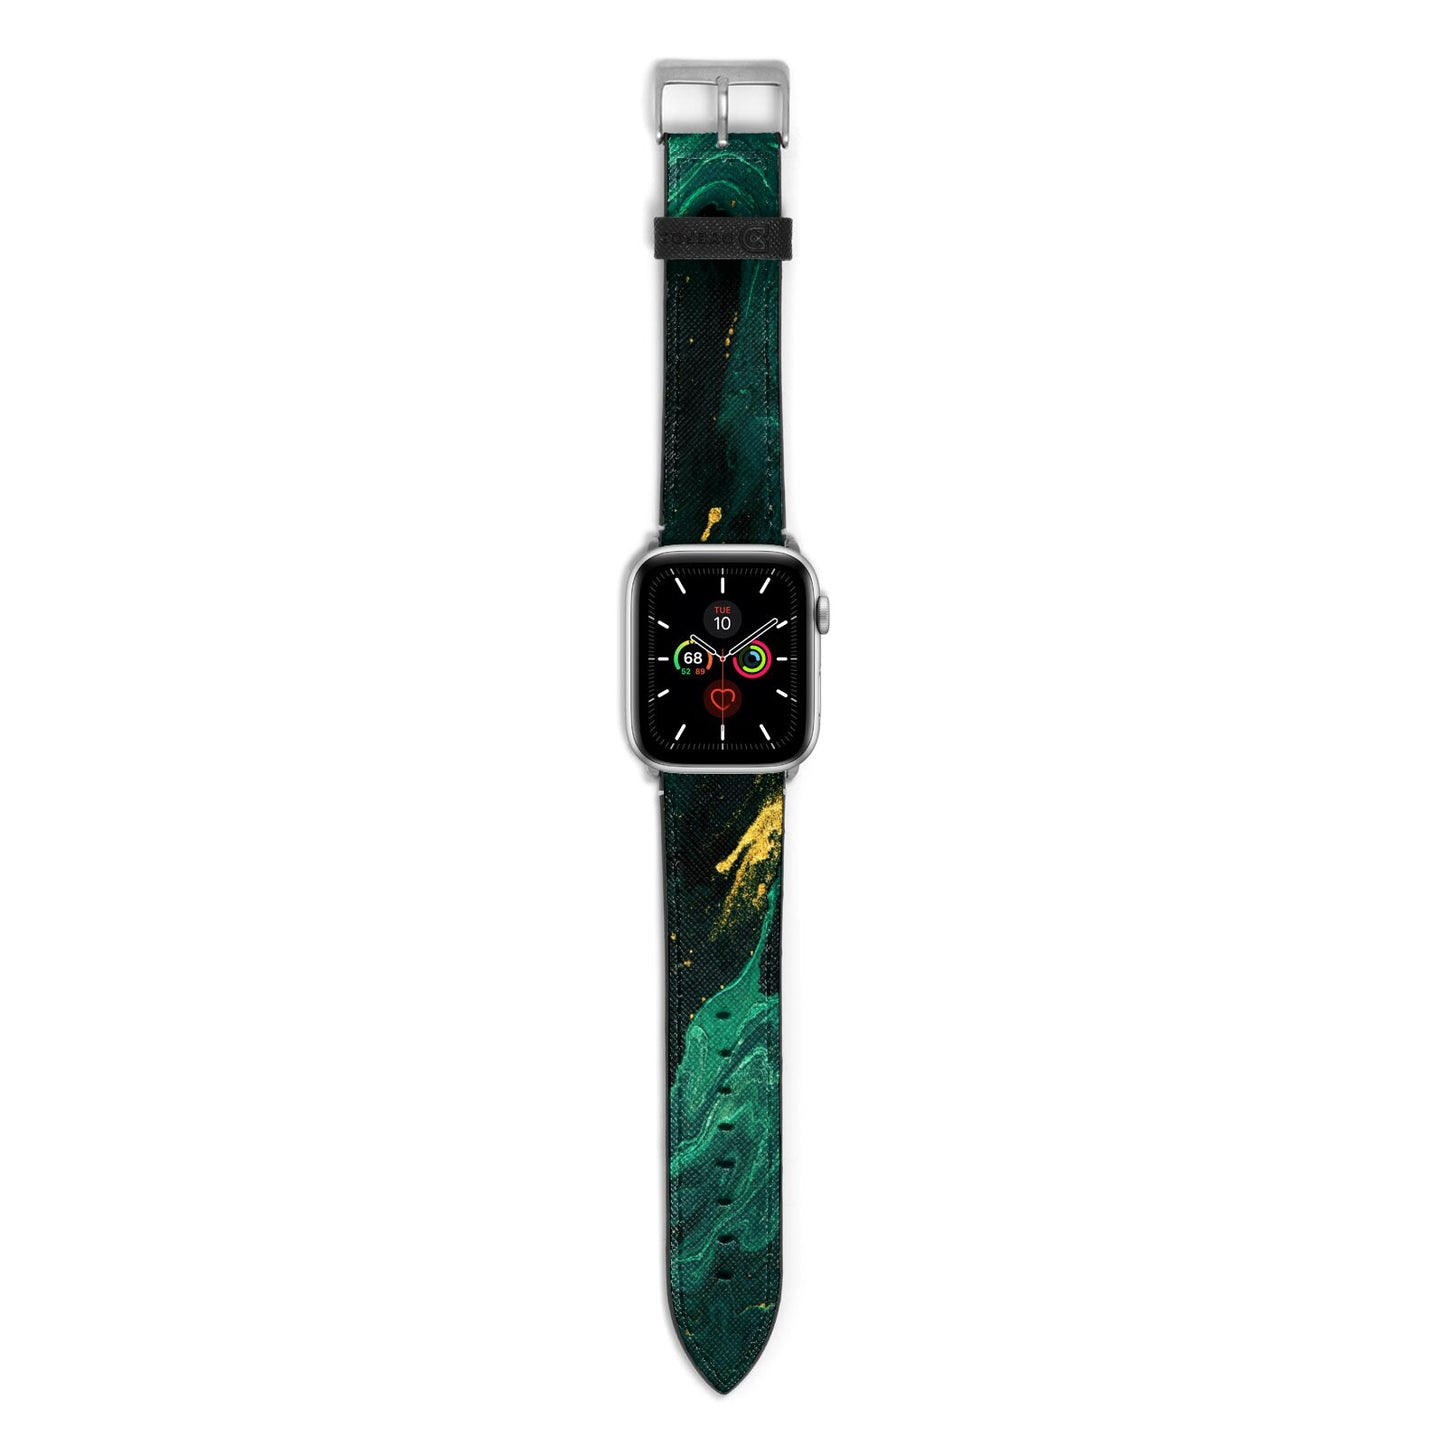 Emerald Green Apple Watch Strap with Silver Hardware